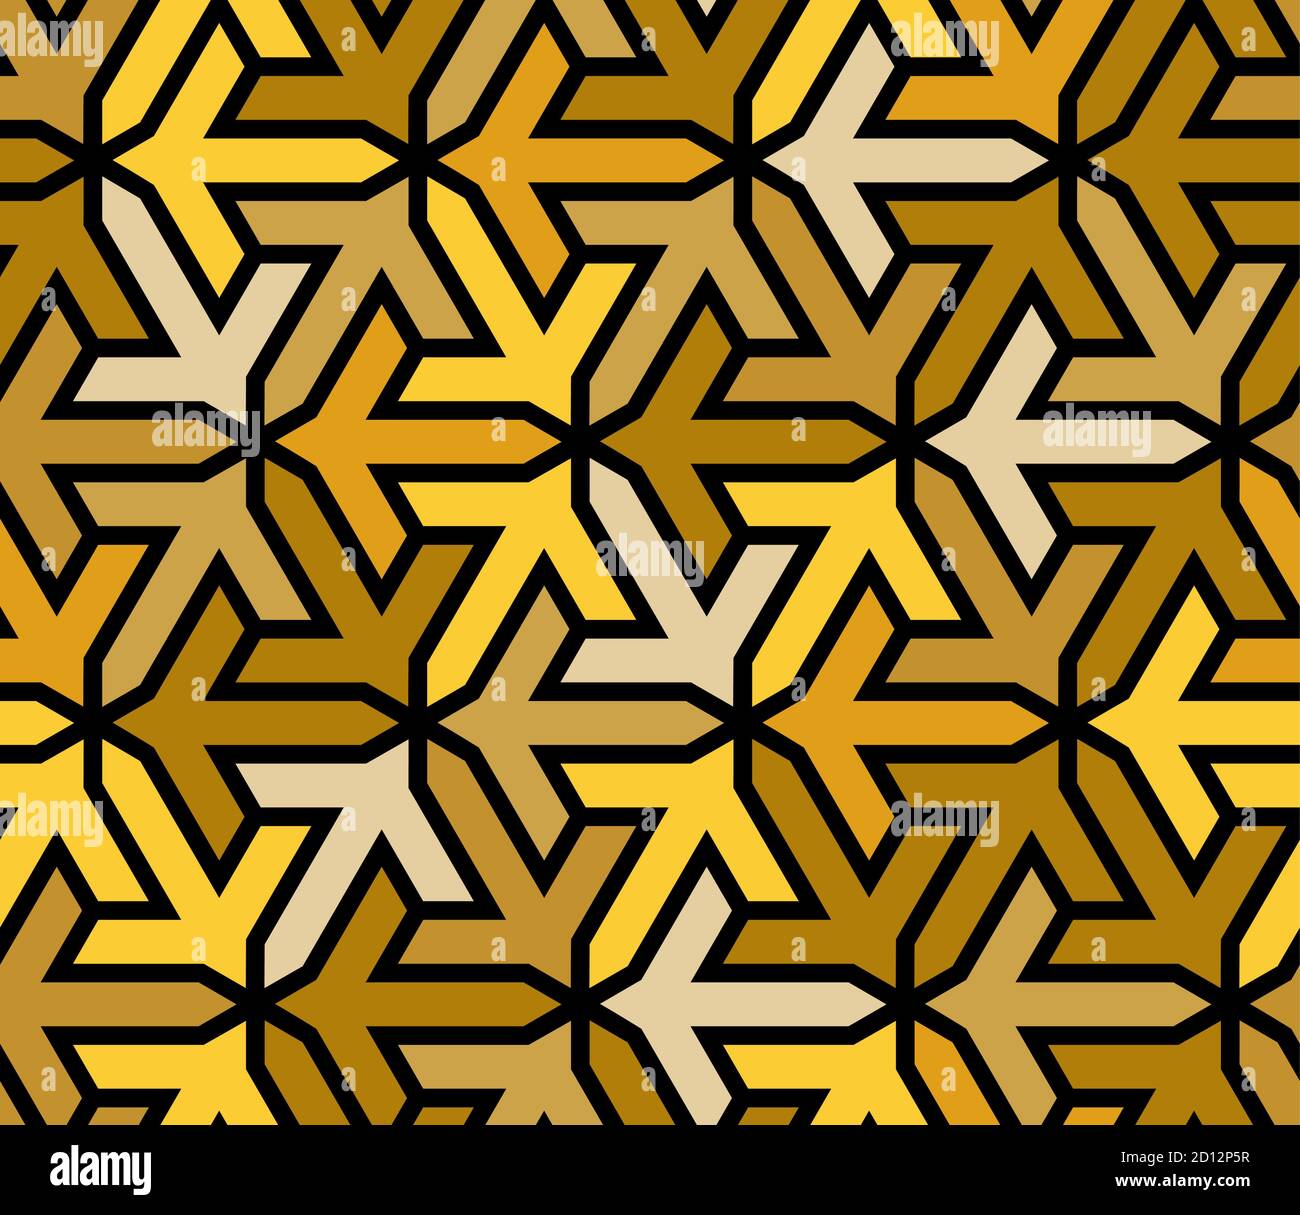 Golden, yellow, geometric islamic pattern with arrows. Color geometric arabic vector texture for cloth, textile, wrapping, wallpaper Stock Vector